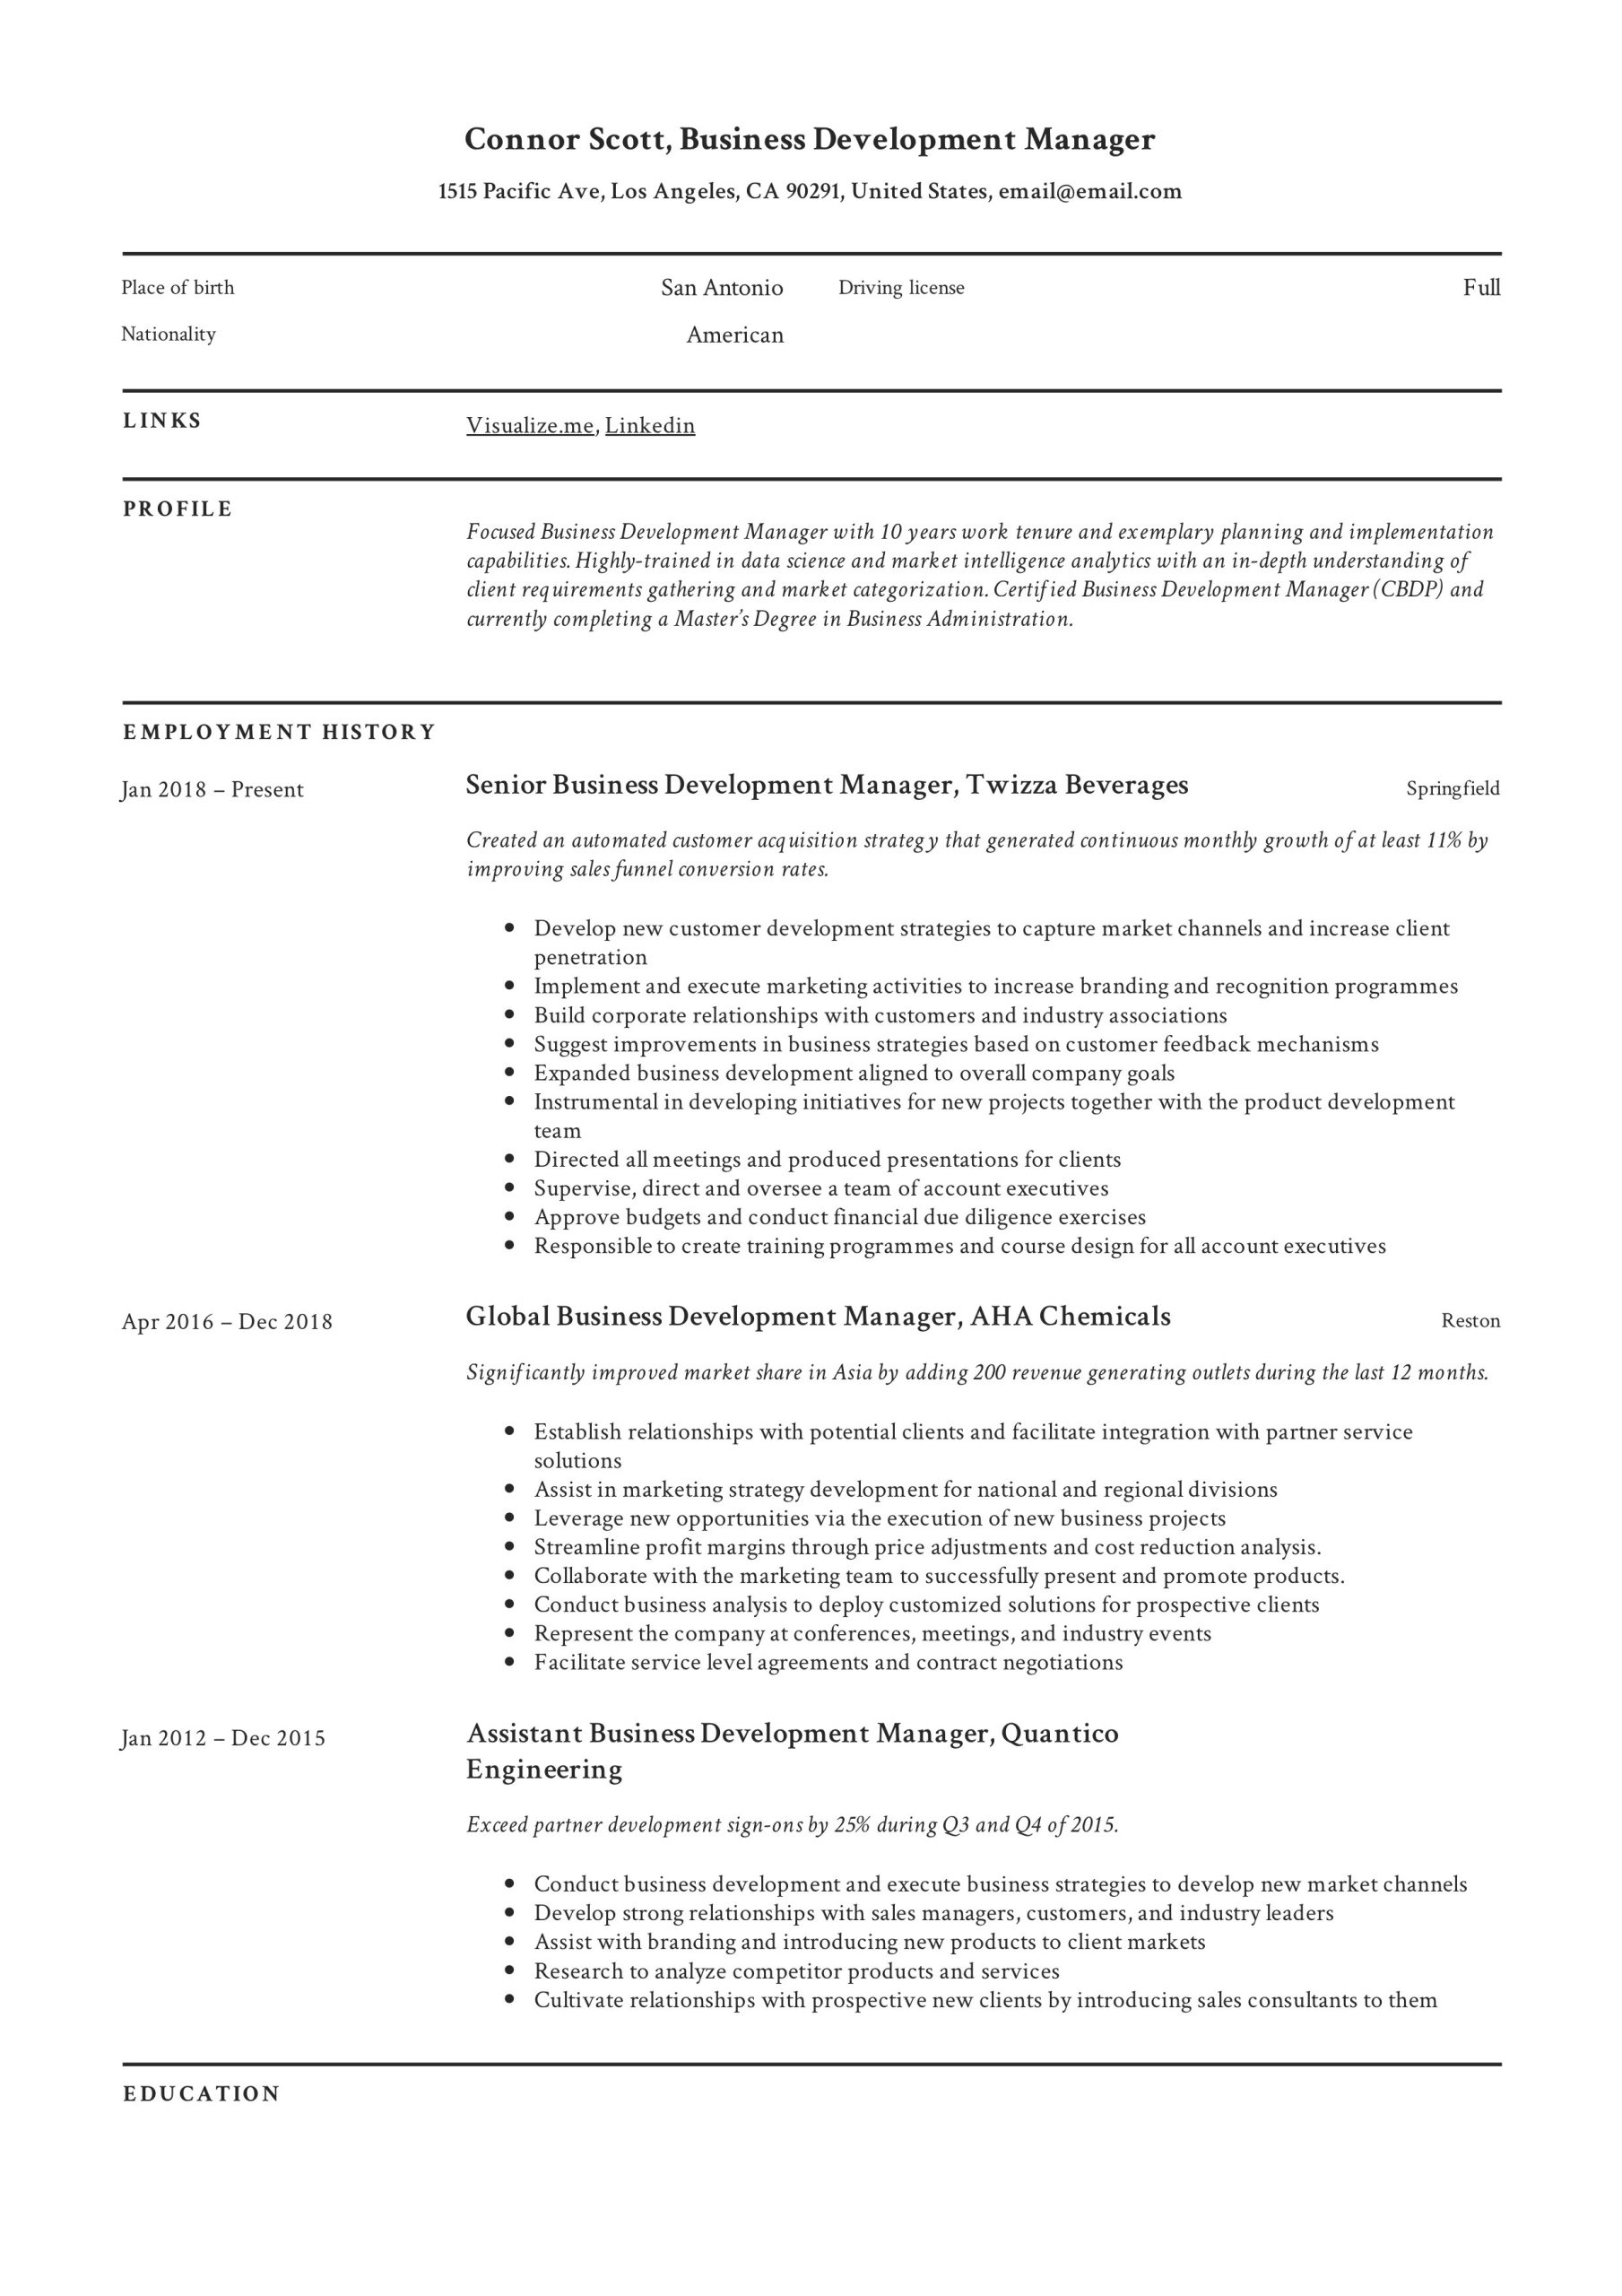 Learning and Development Manager Resume Samples Business Development Manager Resume & Guide 2022